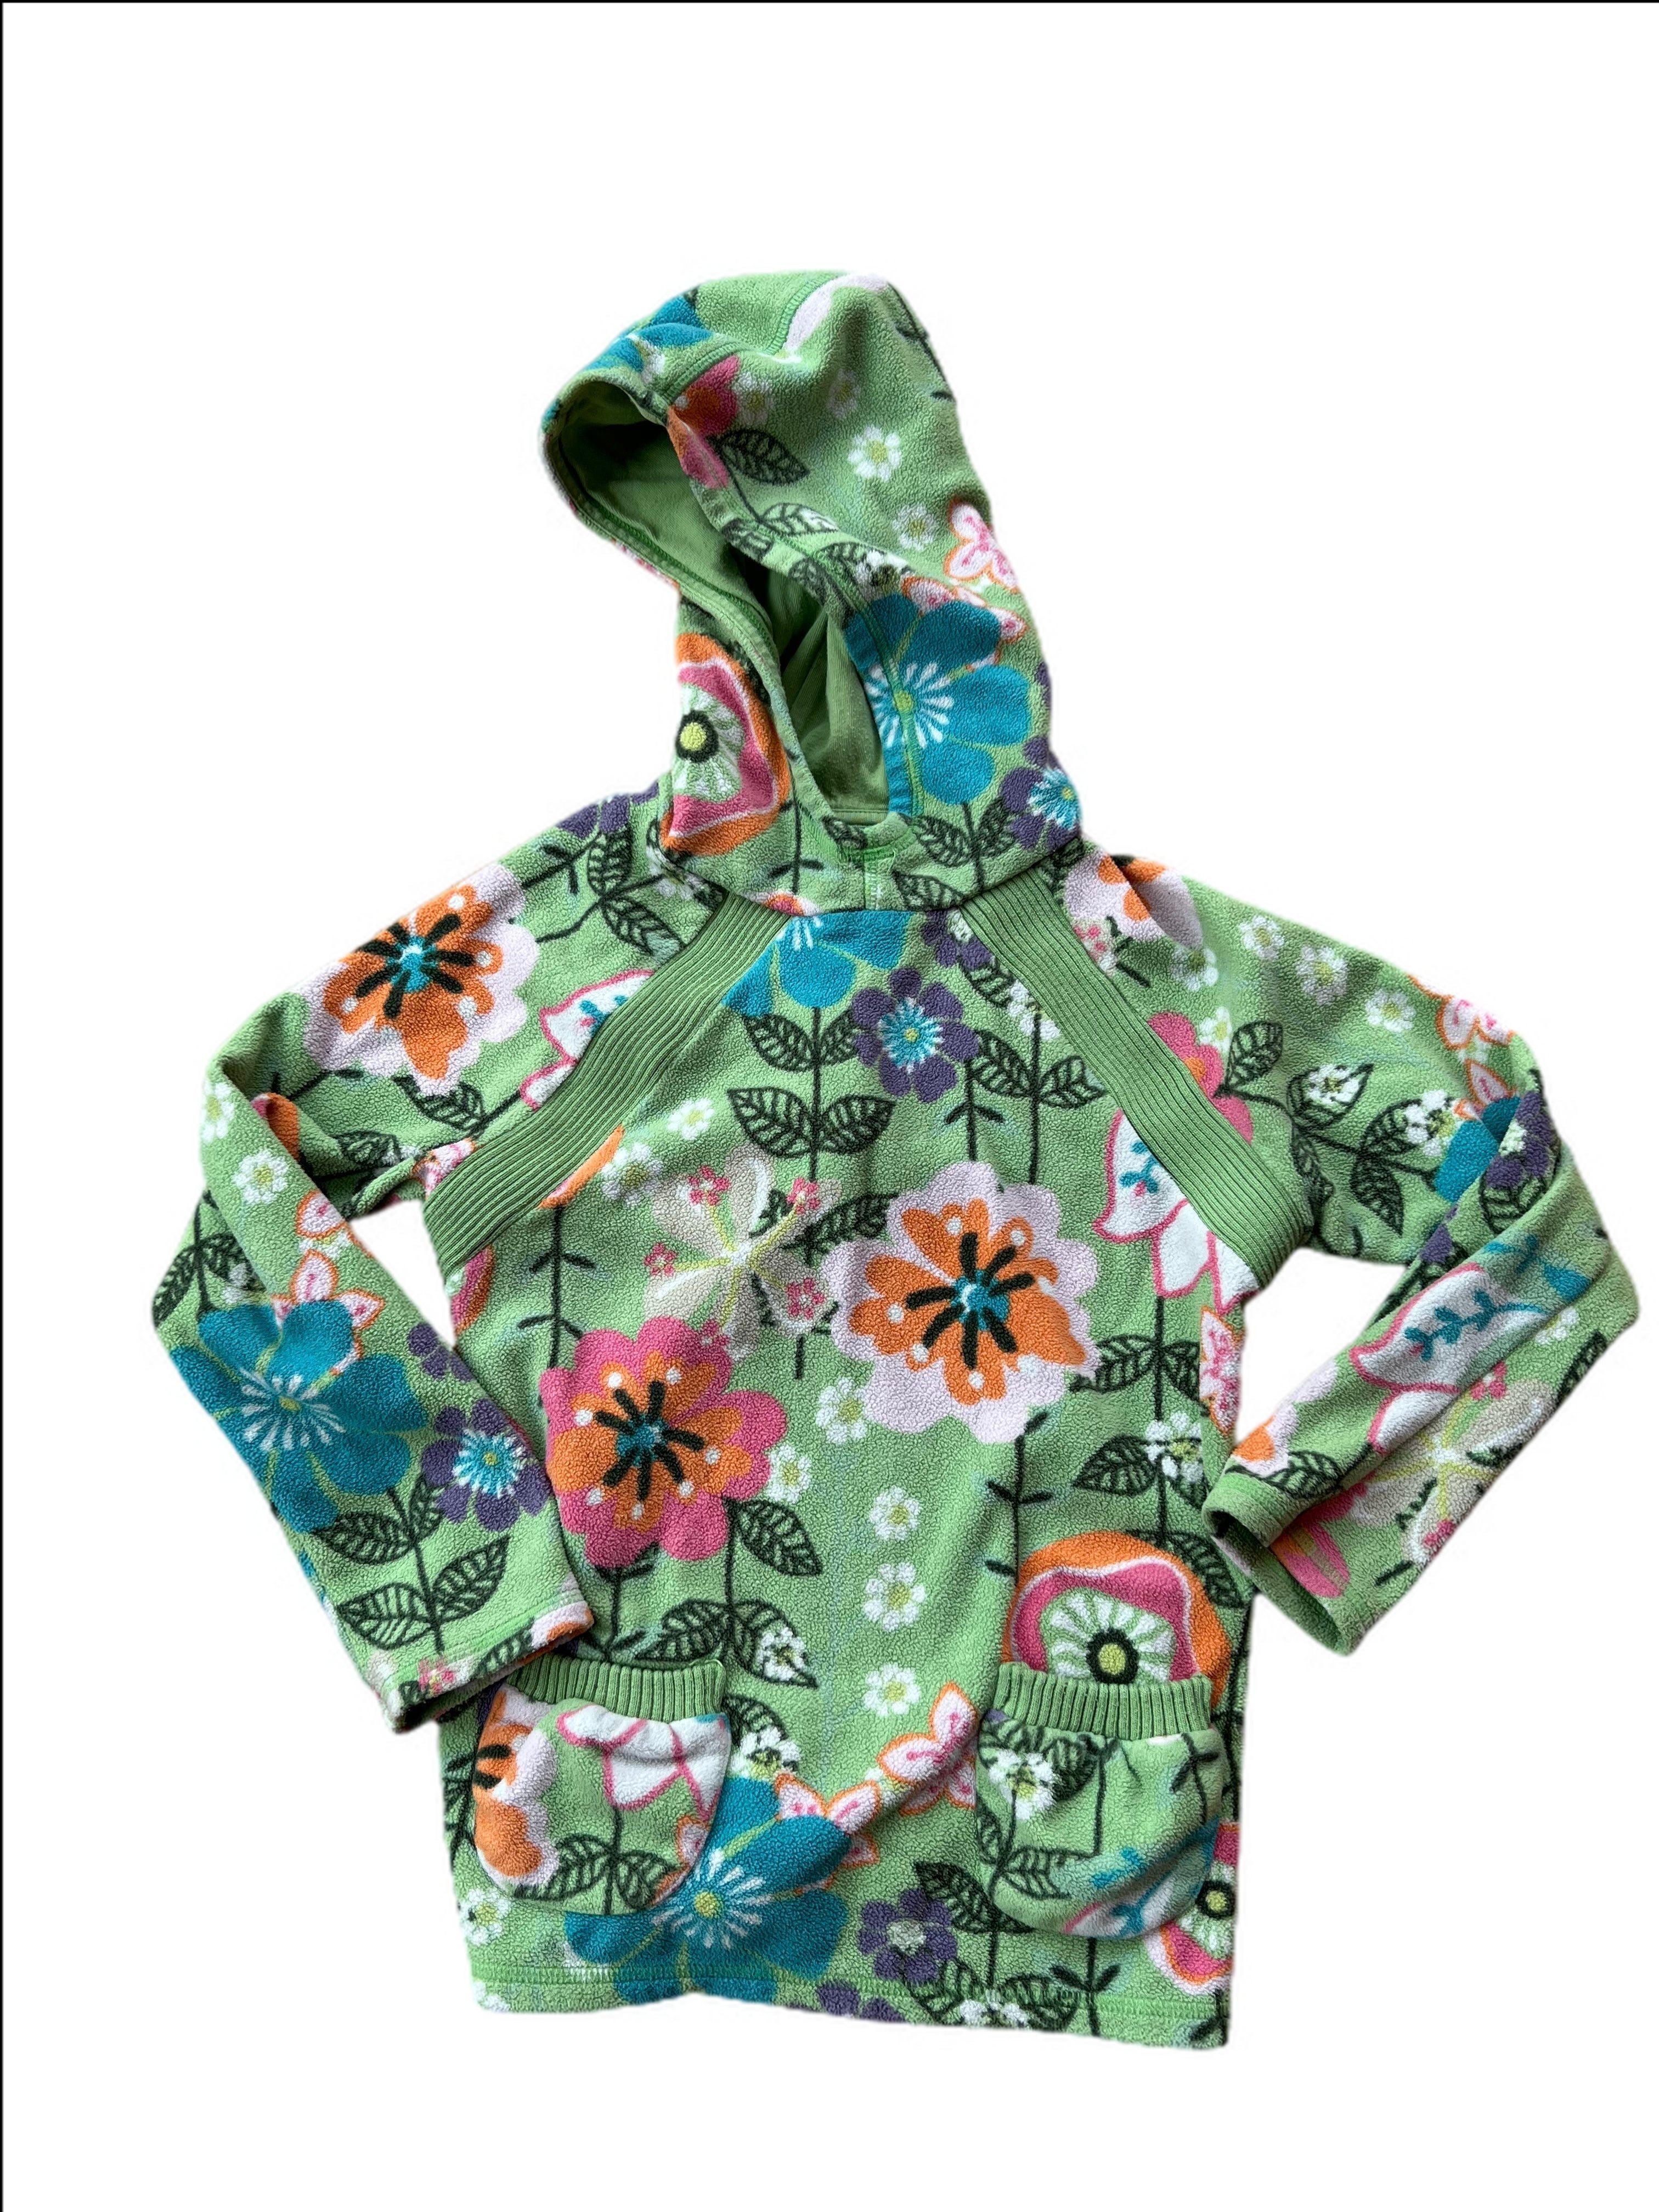 Hooded Fleece Pullover in Floral with patch pockets, Central Park Next